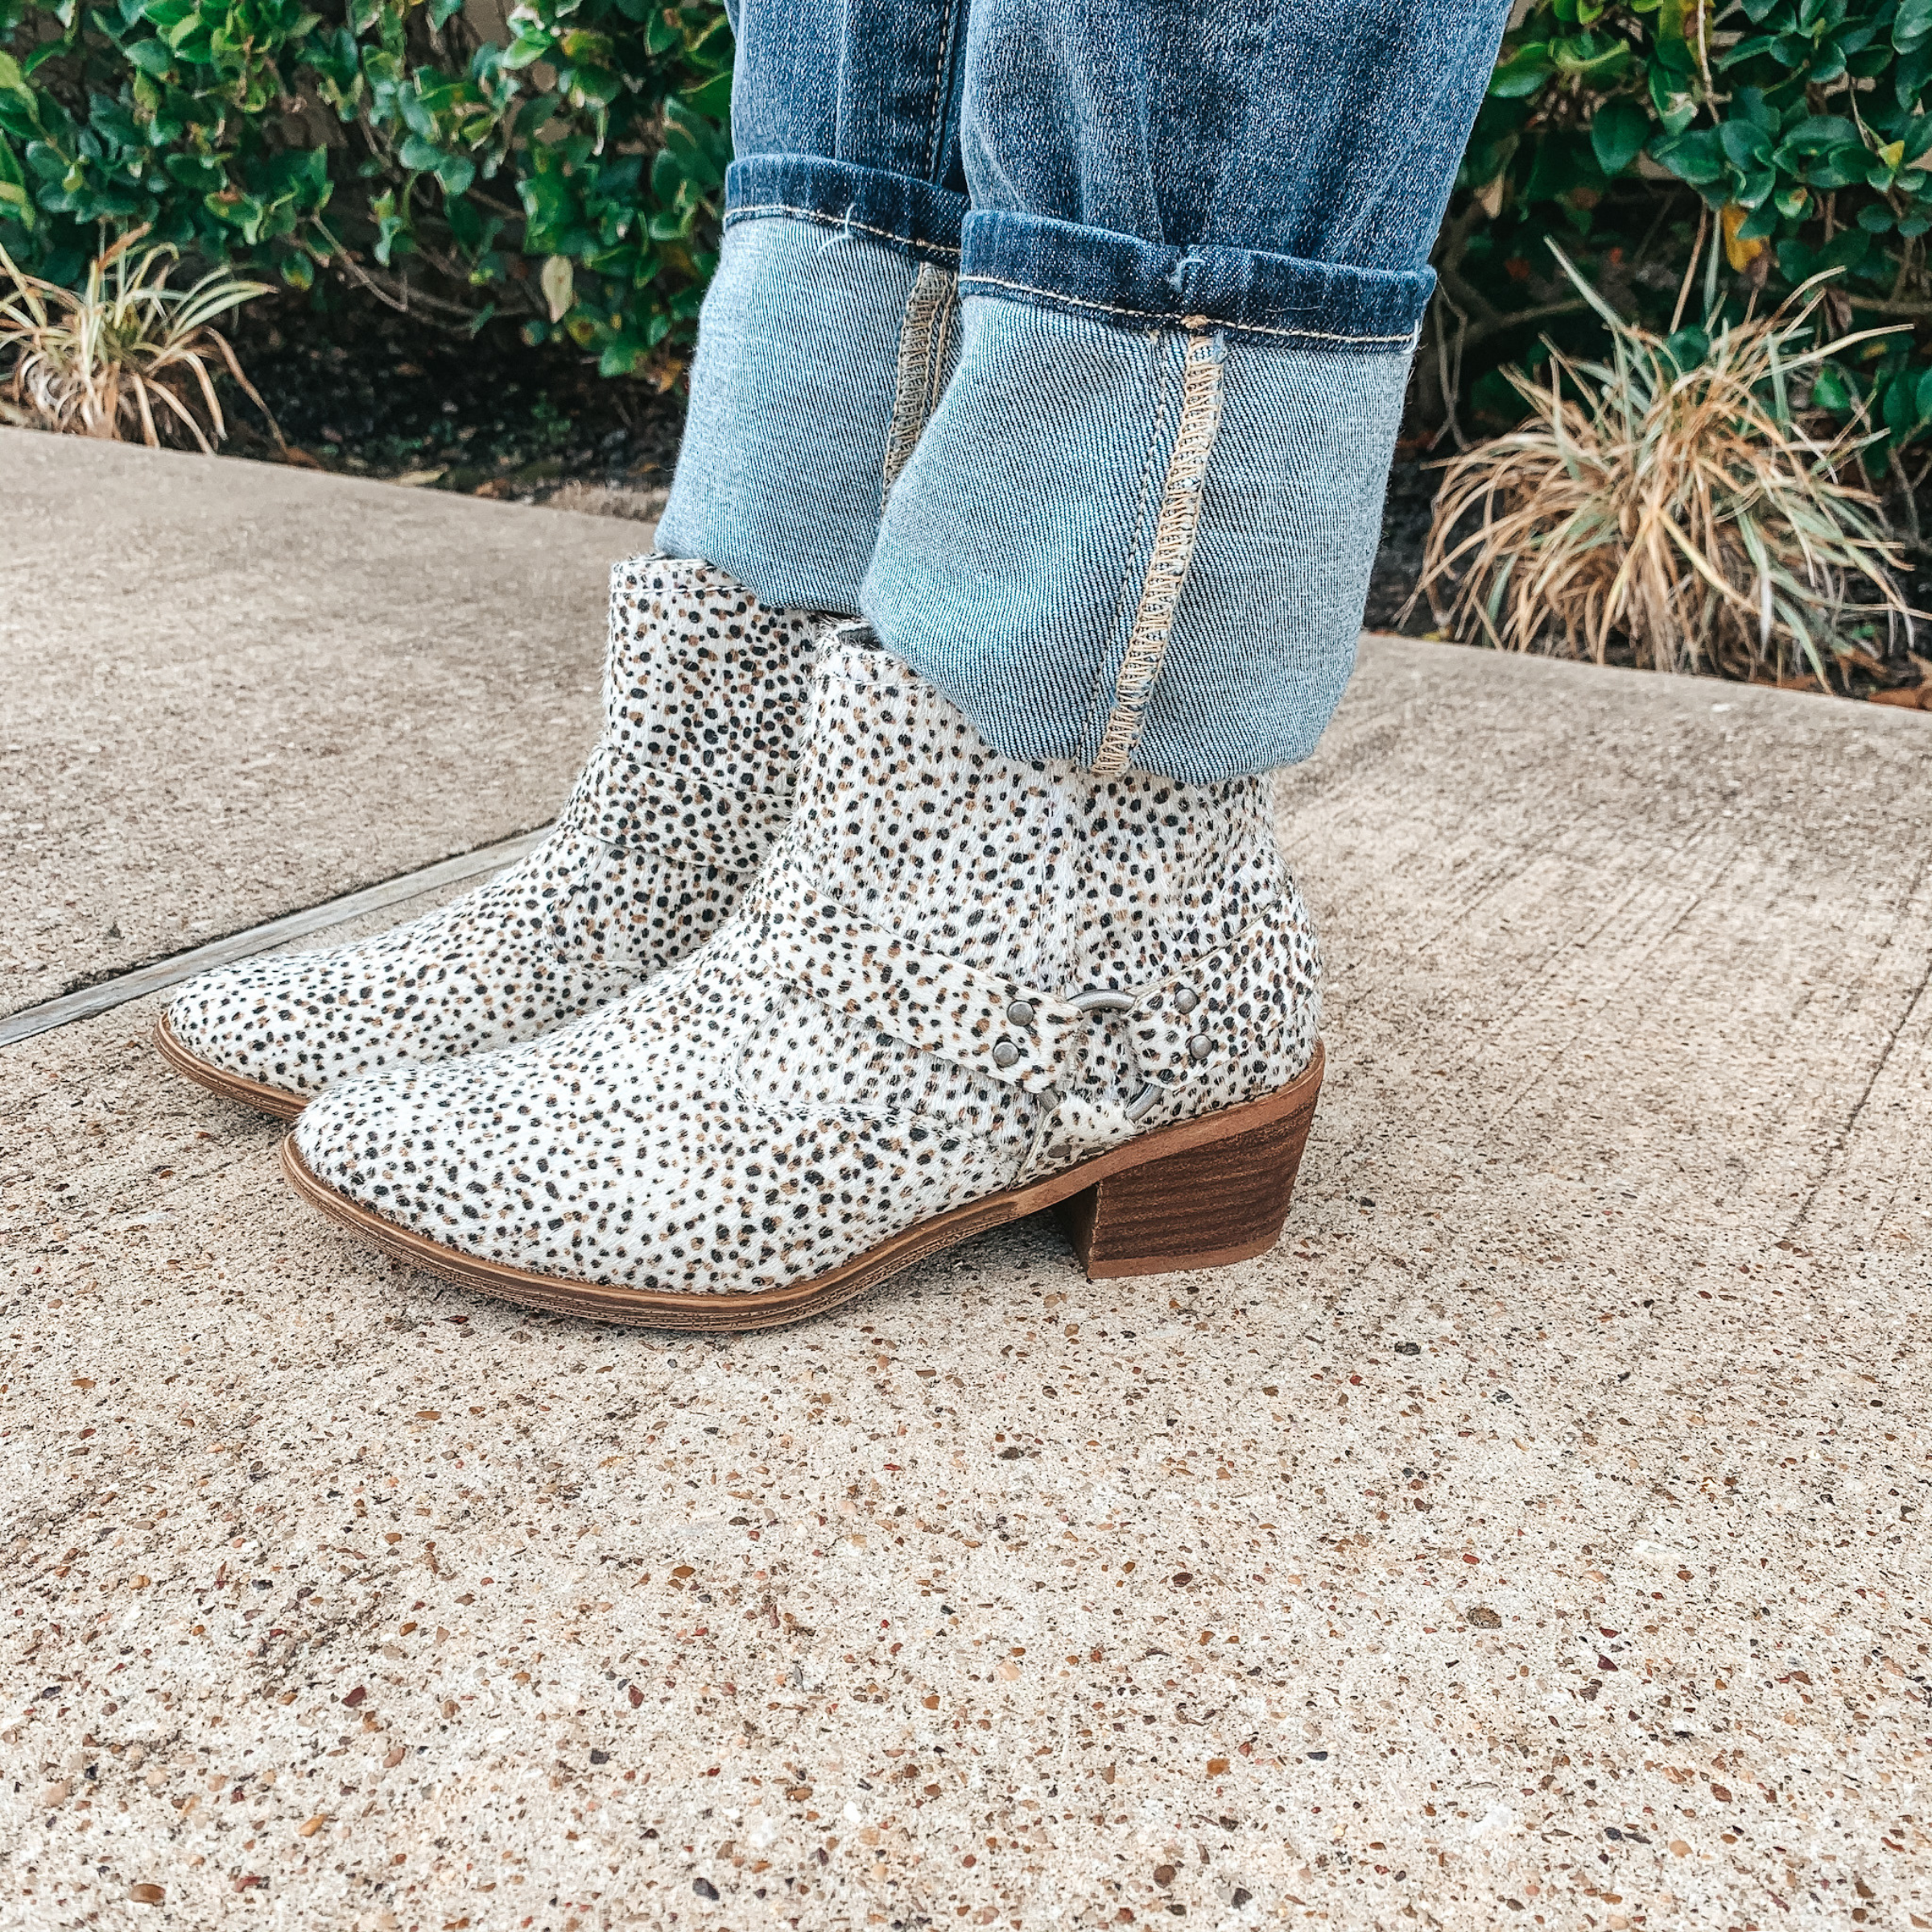 Very G | Oasis Faux Fur Bootie in Dotted Beige - Giddy Up Glamour Boutique